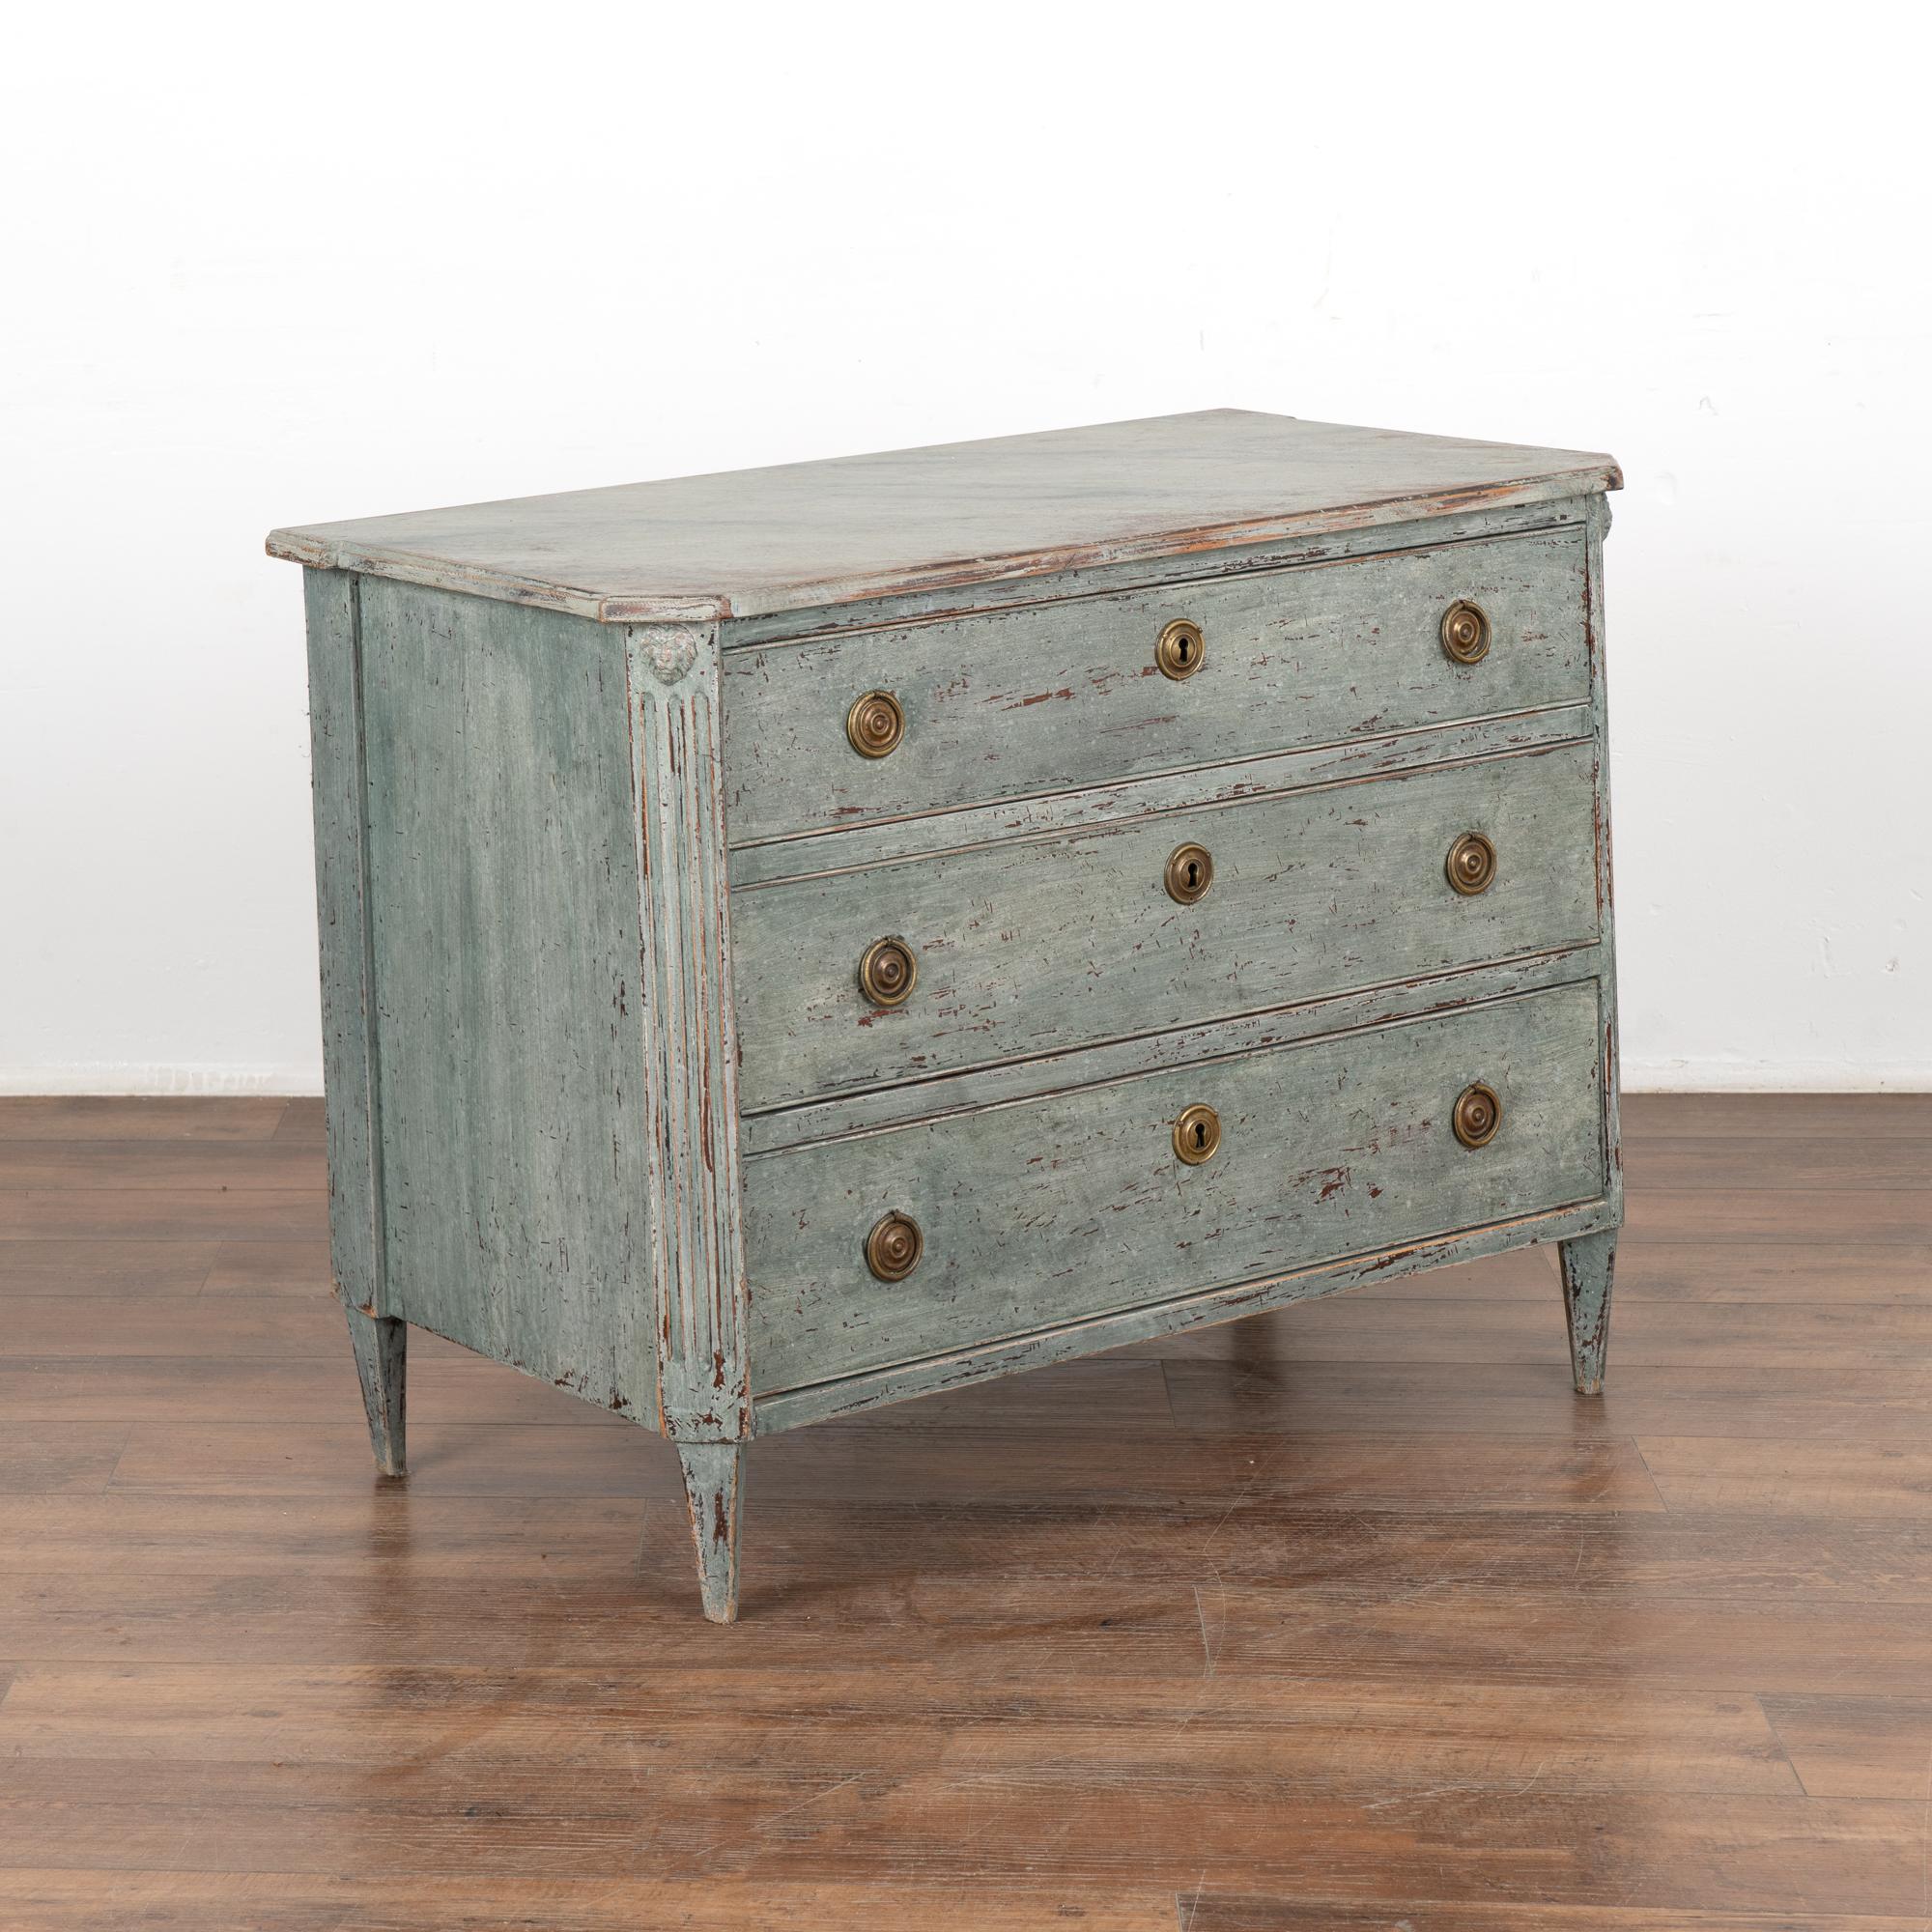 This lovely blue painted chest of drawer has the simple yet elegant lines that reveal its Swedish country style.
Fluted carving along the canted sides and tapered fluted feet, two brass pulls on each drawer.
The (newer) professionally applied